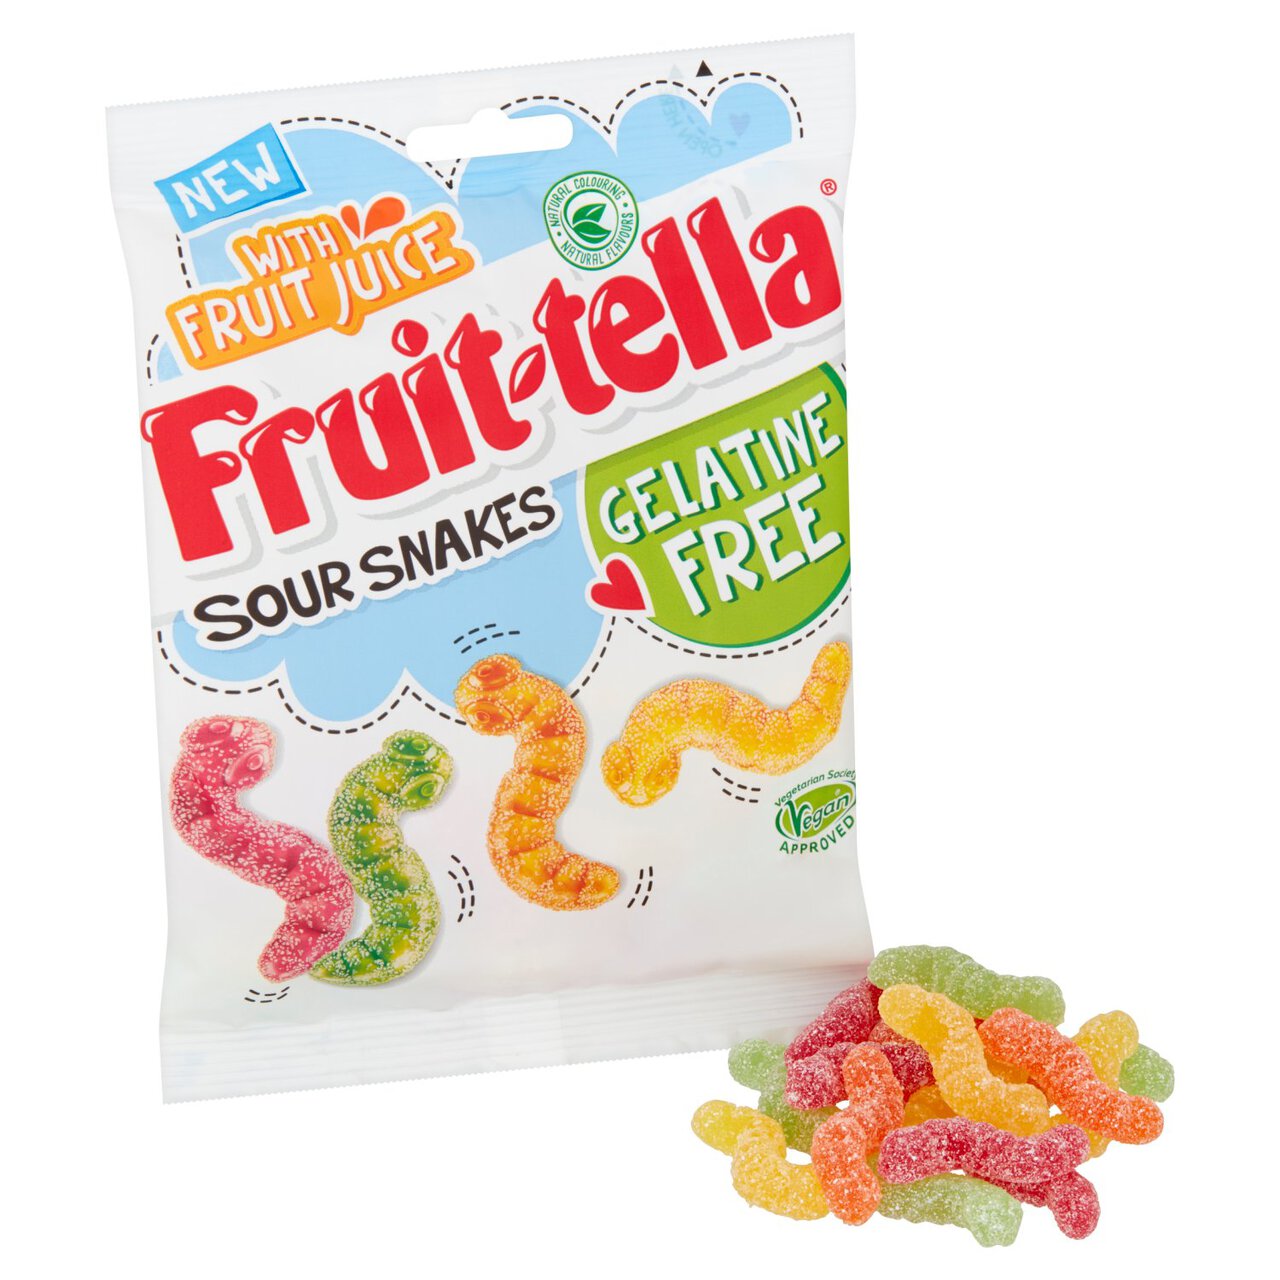 Fruittella Vegan Sour Snakes Chewy Sweets Bag 120g